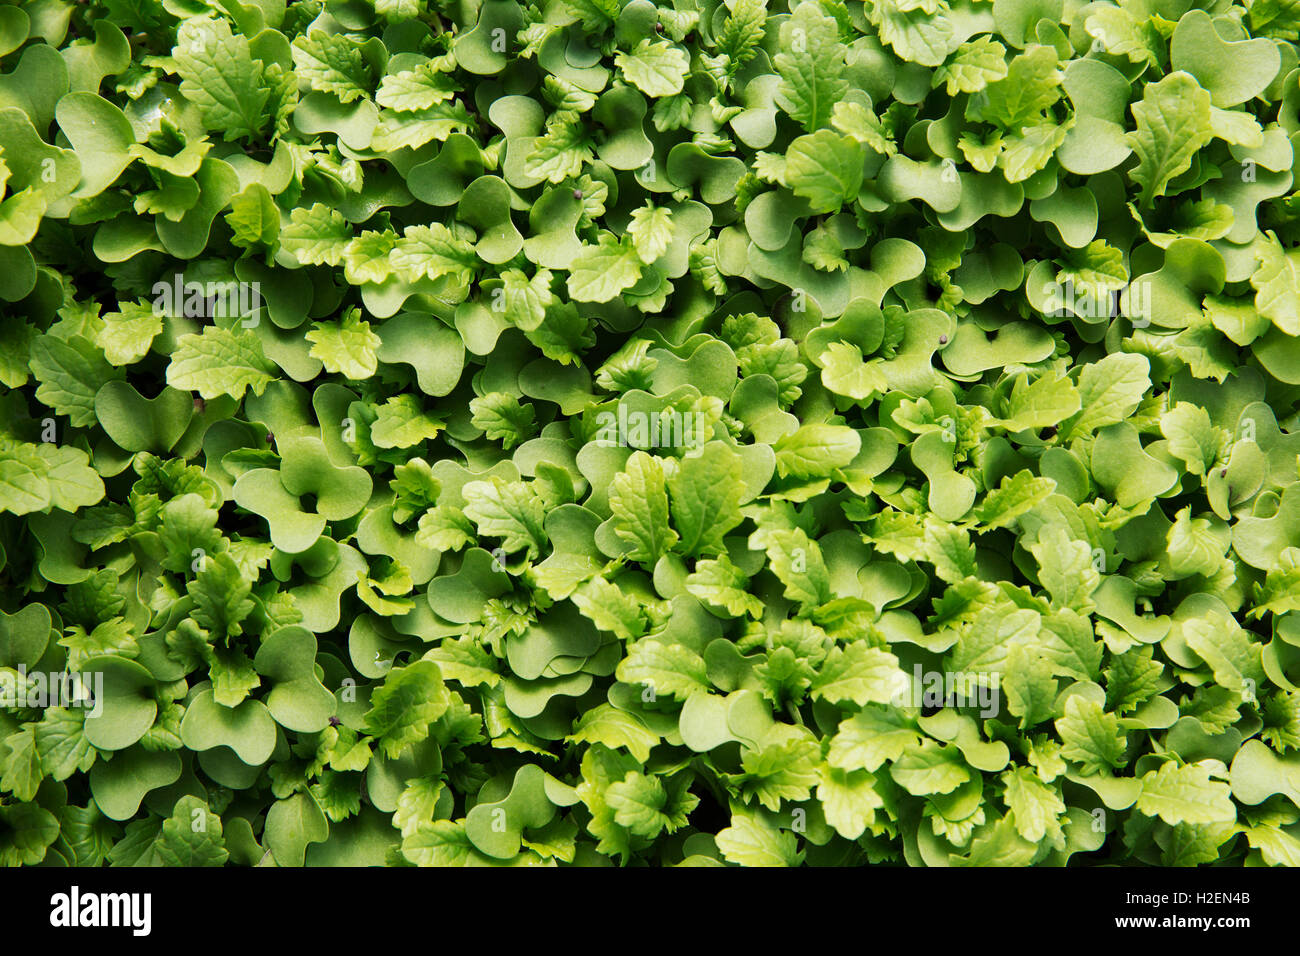 Small salad leaves, micro leaves growing. View from above. Stock Photo